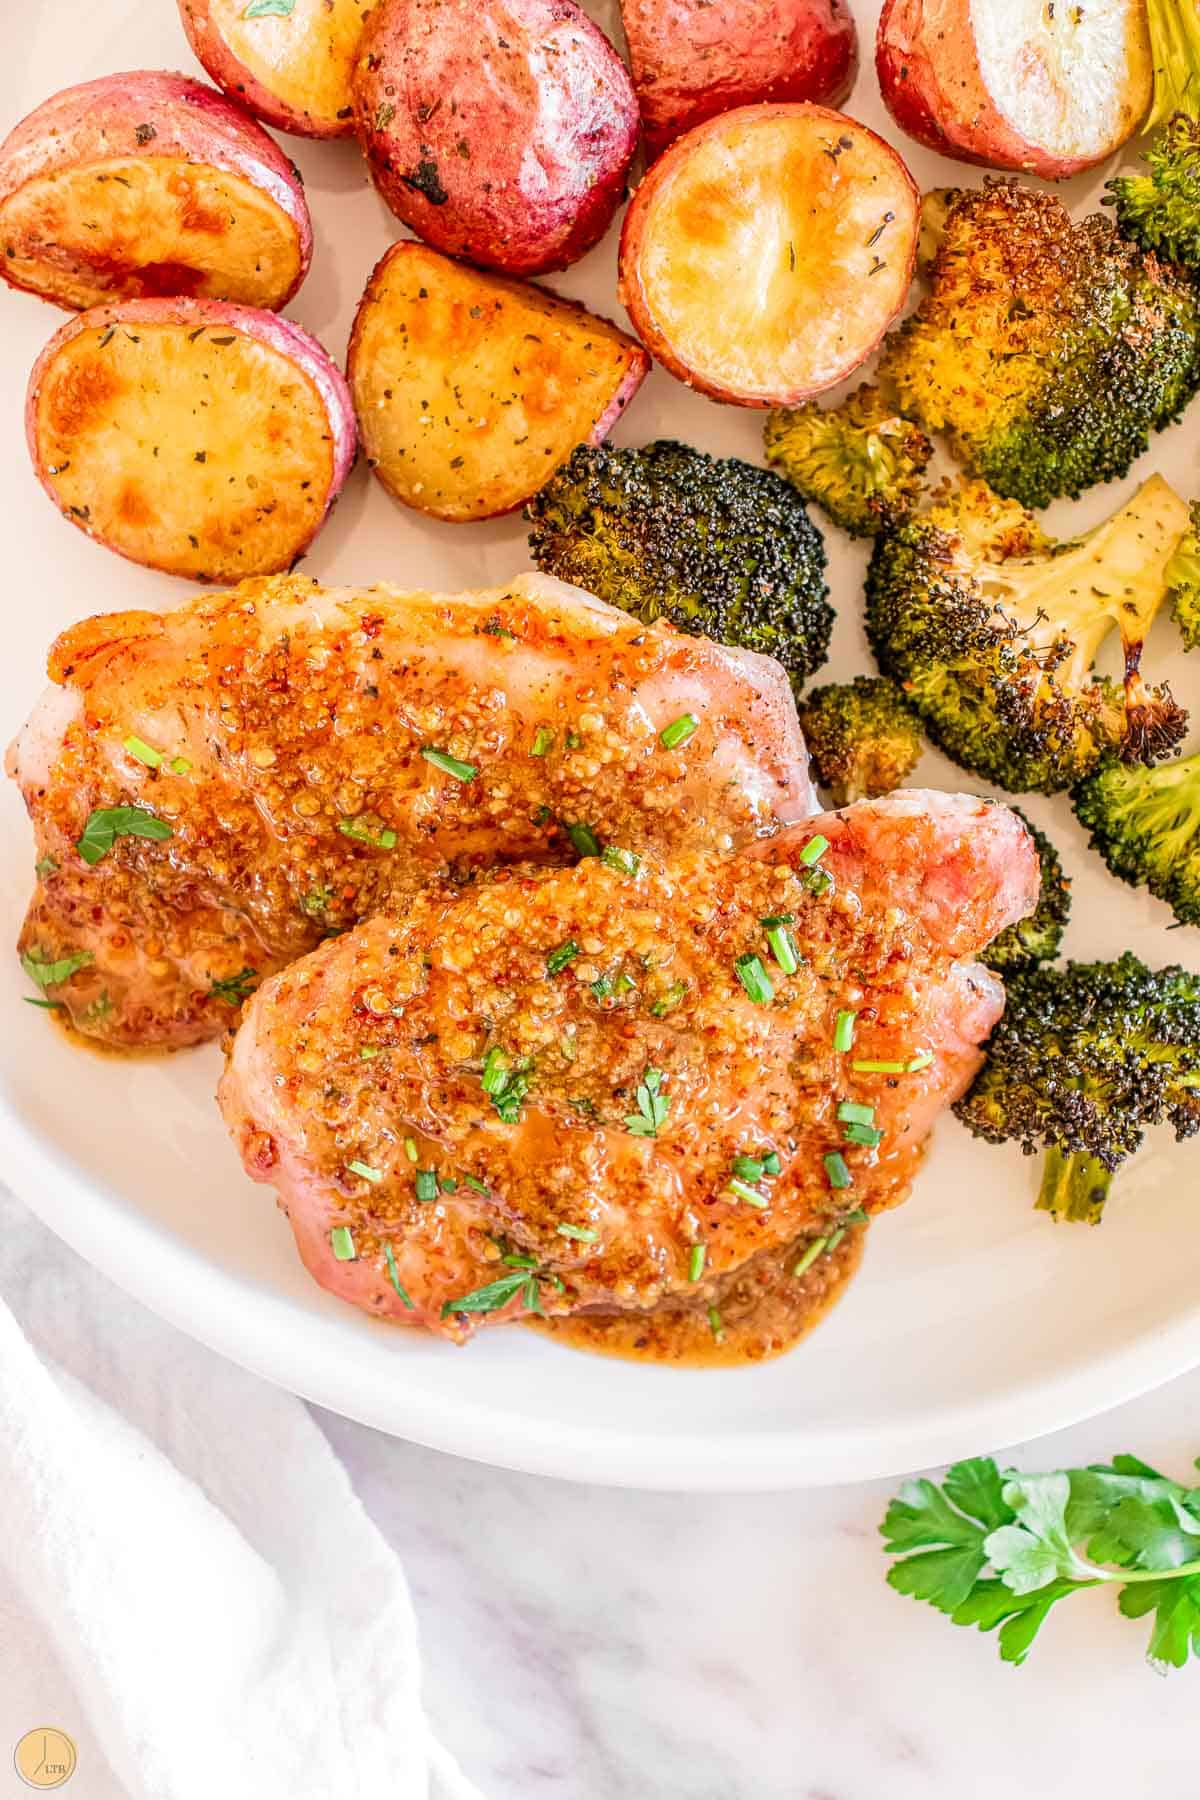 you are going to love this great recipe for pork chops